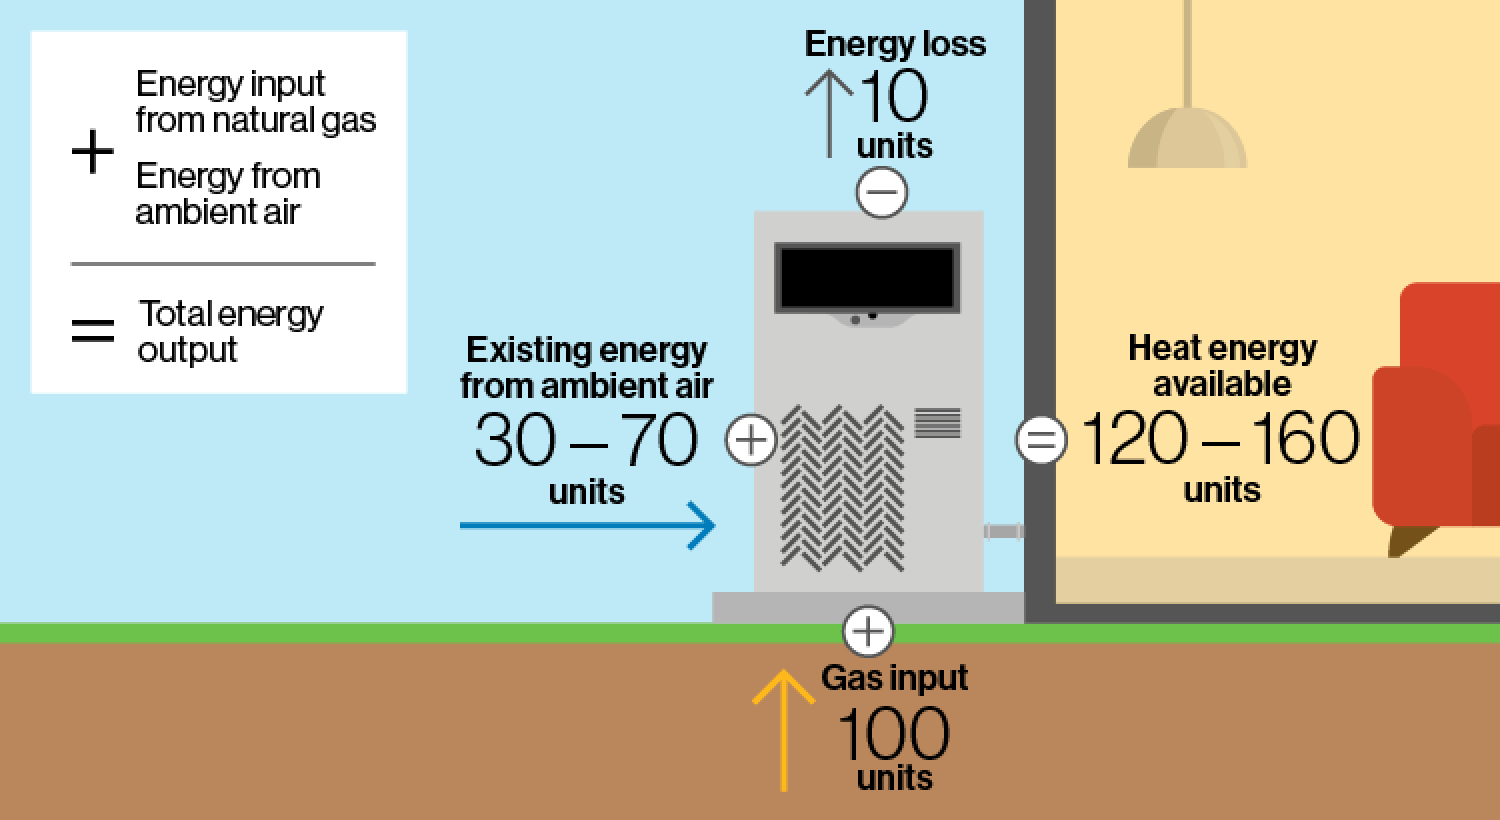 An infographic showing the energy inputs and outputs of a gas heat pump. Existing energy from outside (30 to 70 units) flows into the heat pump. Natural gas input of 100 units is added. Ten units of energy are lost. The sum of these flows into a home—totalling 120 to 160 units of available heat energy. 